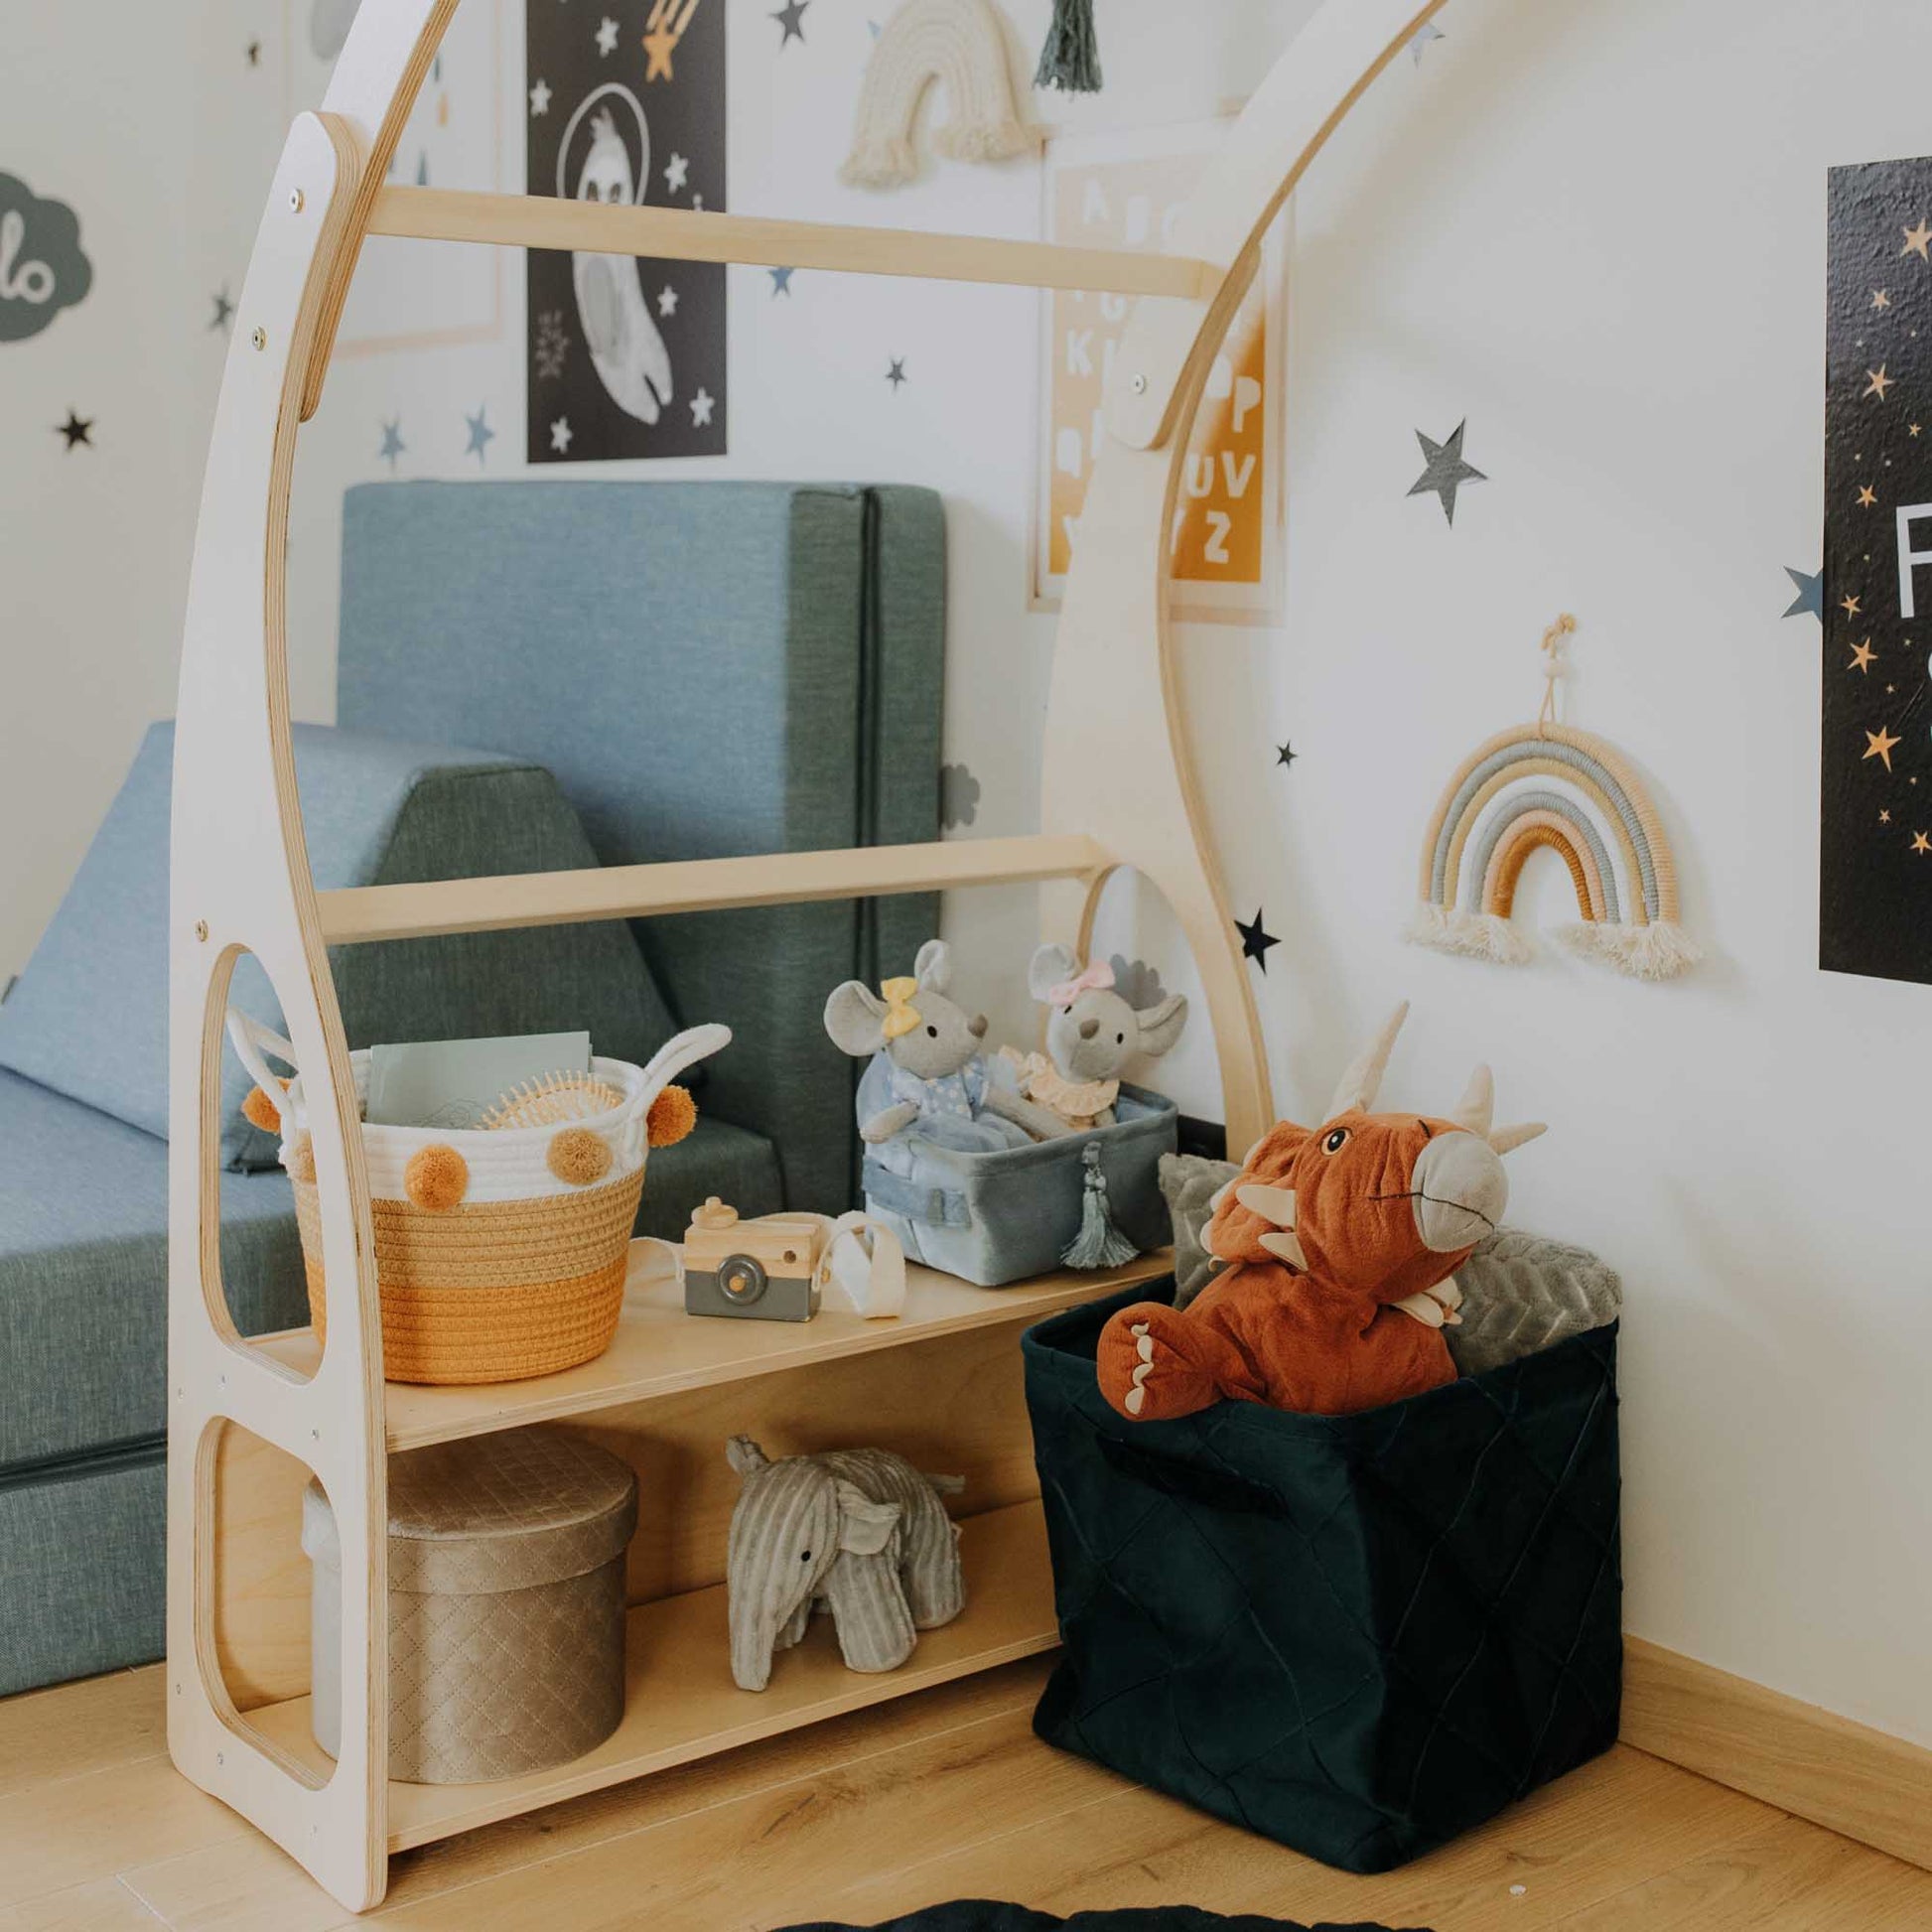 A child's room with a bed, Sweet Home From Wood Montessori toy shelf, and toys.